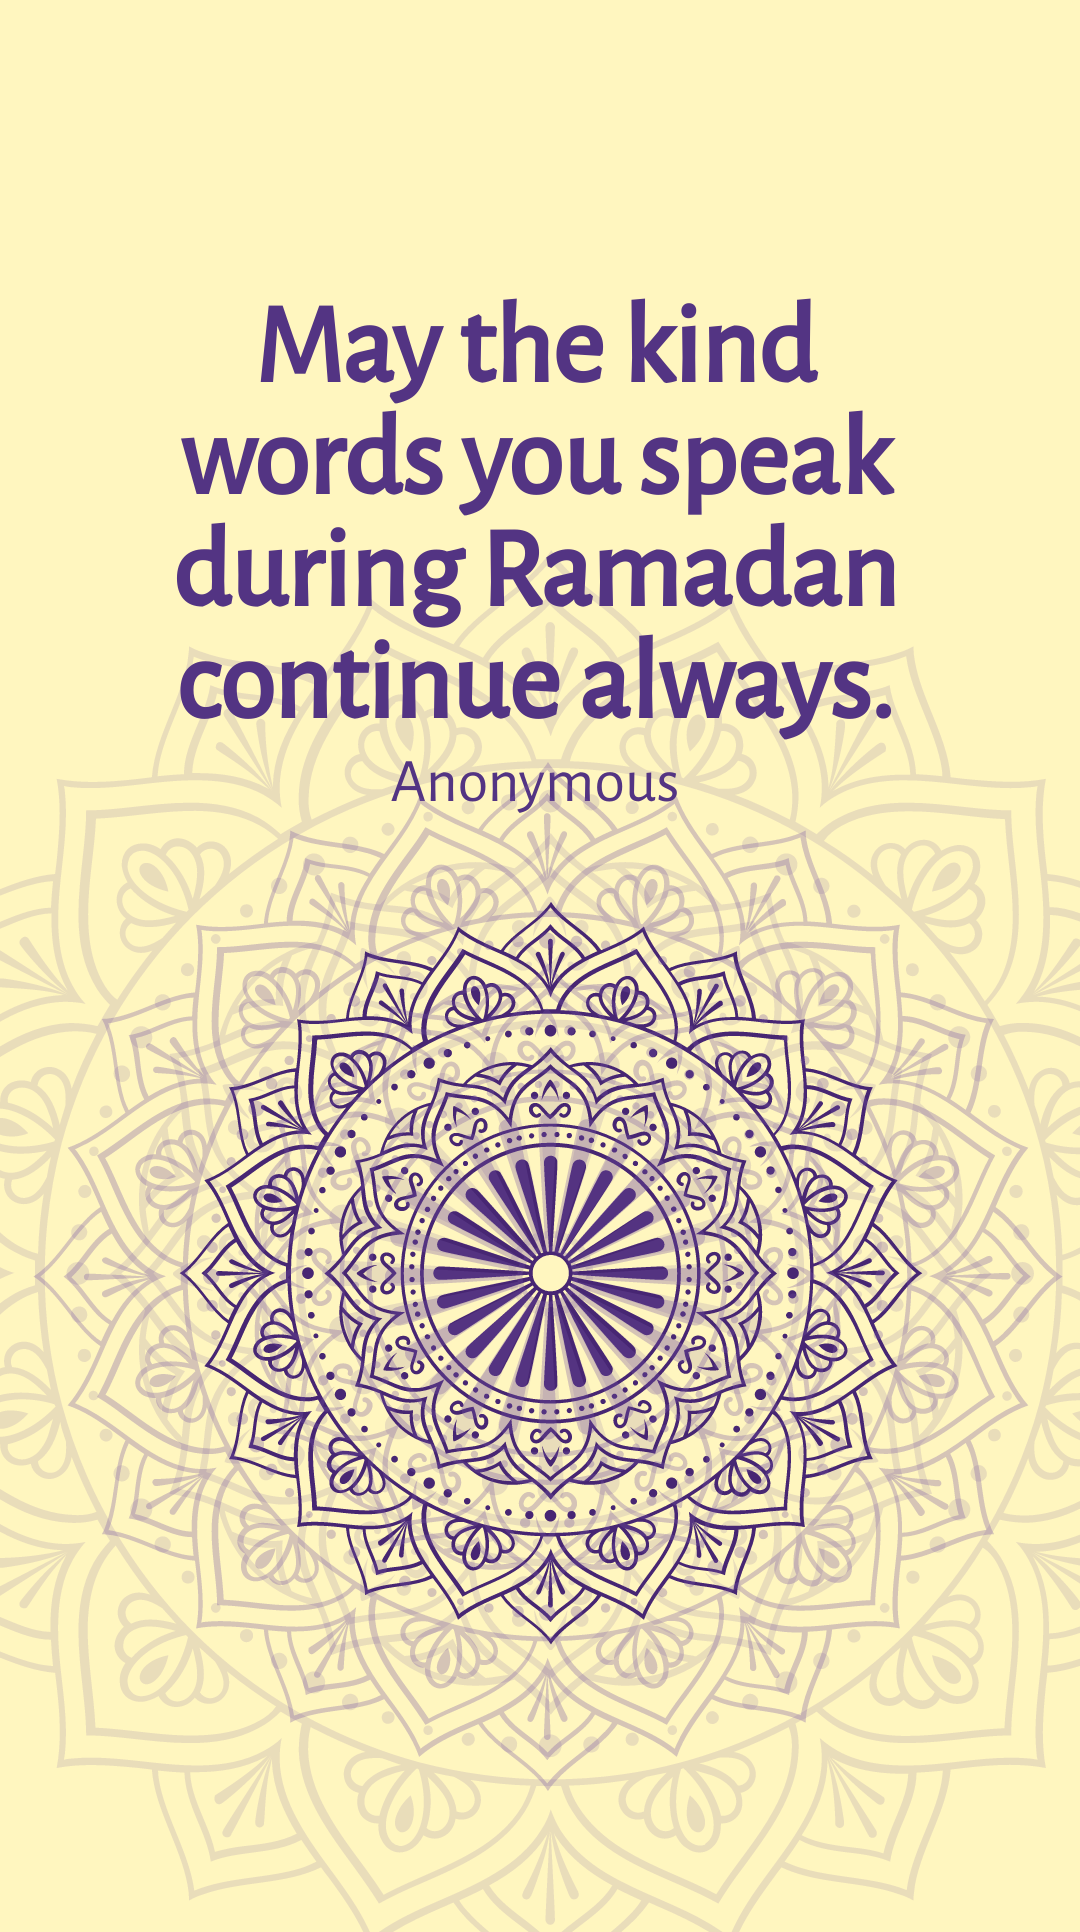 Anonymous - May the kind words you speak during Ramadan continue always.